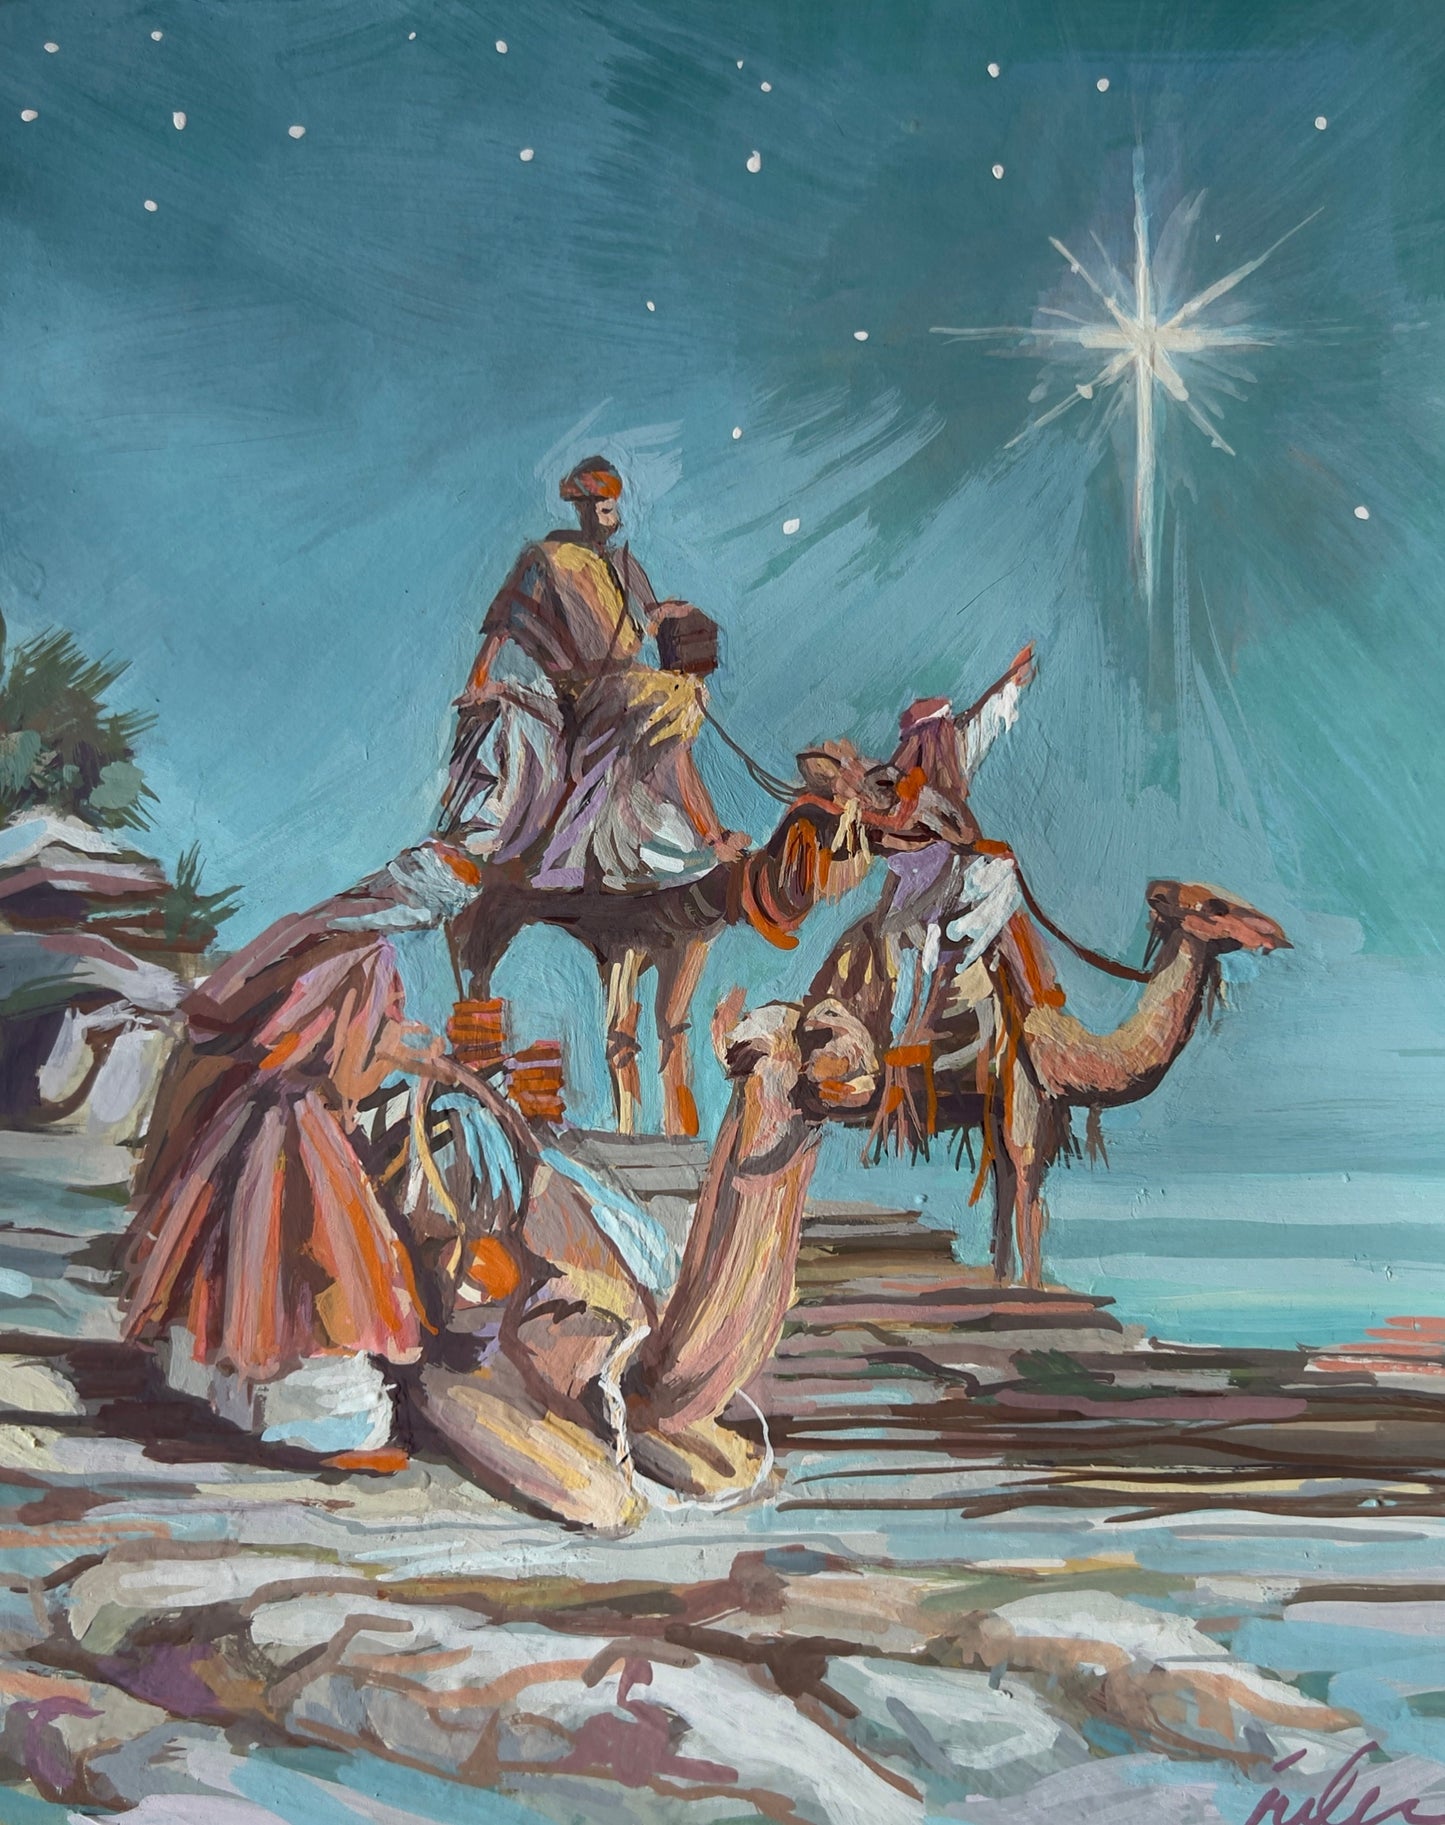 THREE KINGS ARRIVING ON CAMELS  |  Giclee Reproduction Print of an Original Gouache Painting